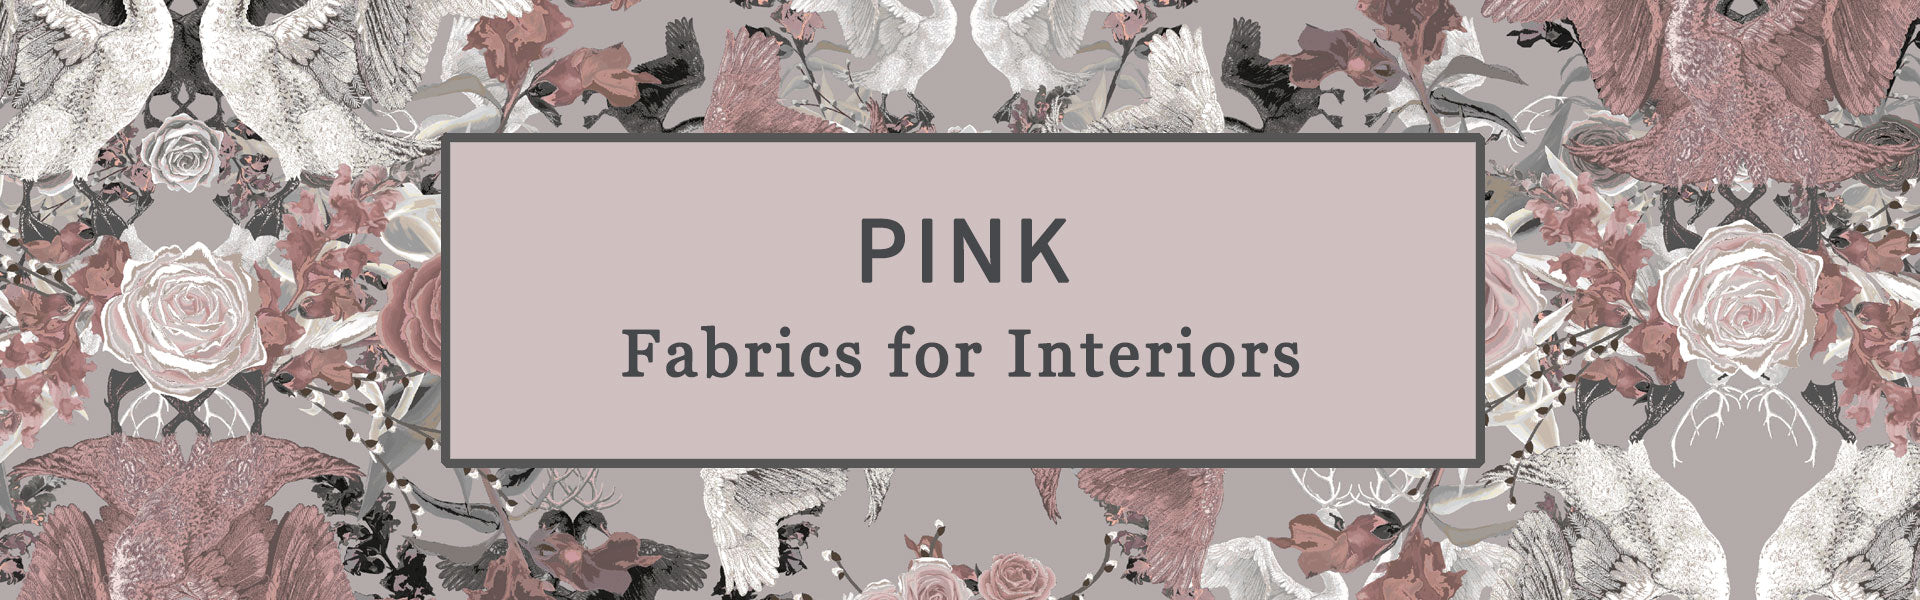 Pink Fabric for Interiors, Upholstery, Curtains & Soft Furnishings by Designer, Becca Who